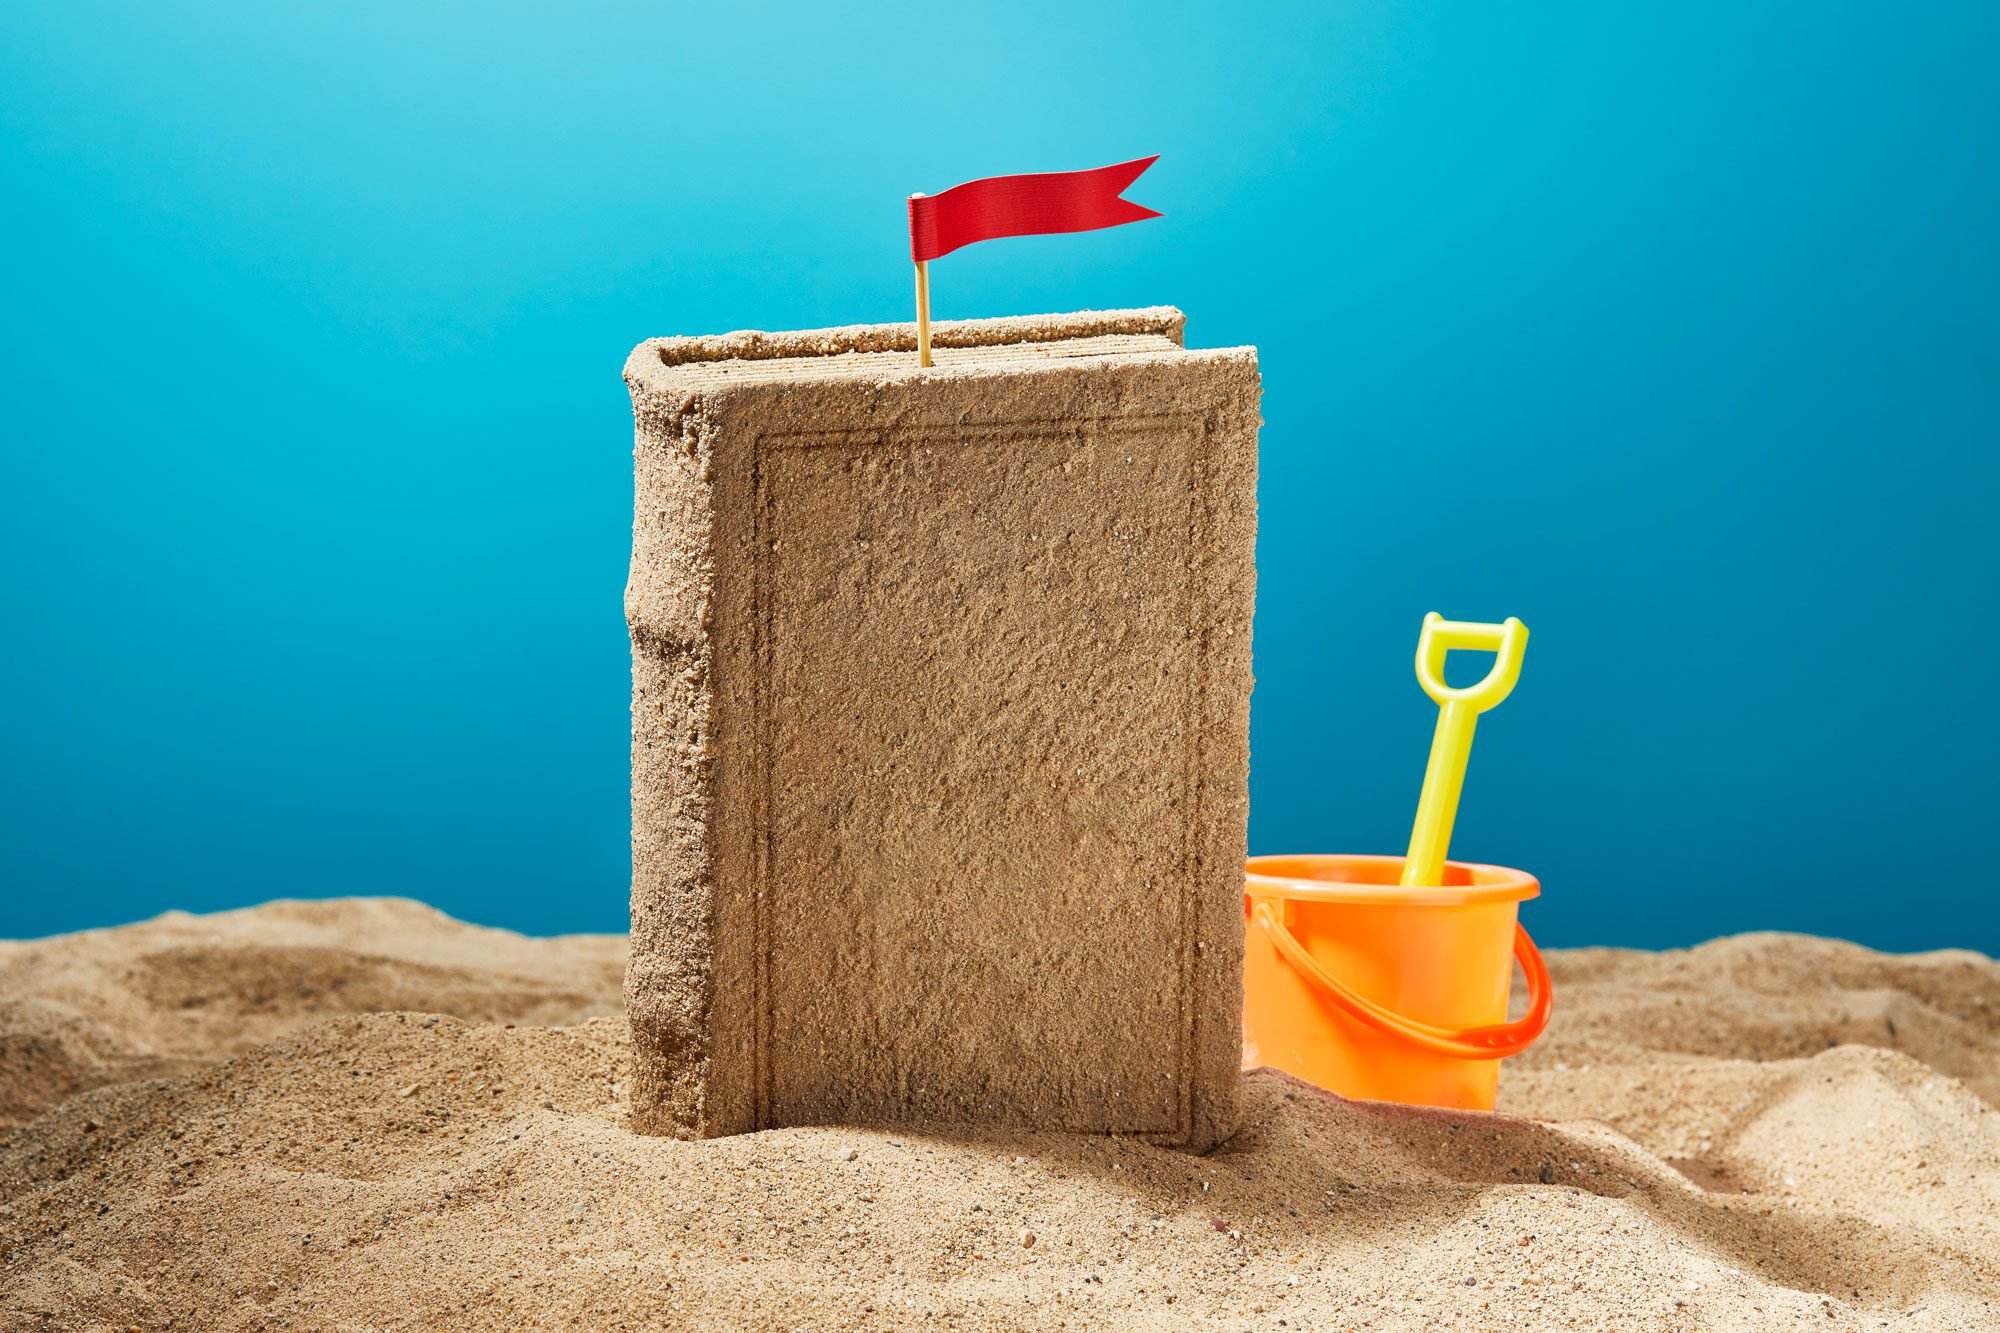 a "sand castle" made in the shape of a book stands up from the sand with a red flag on top. orange pail and yellow shovel is nearby. blue background